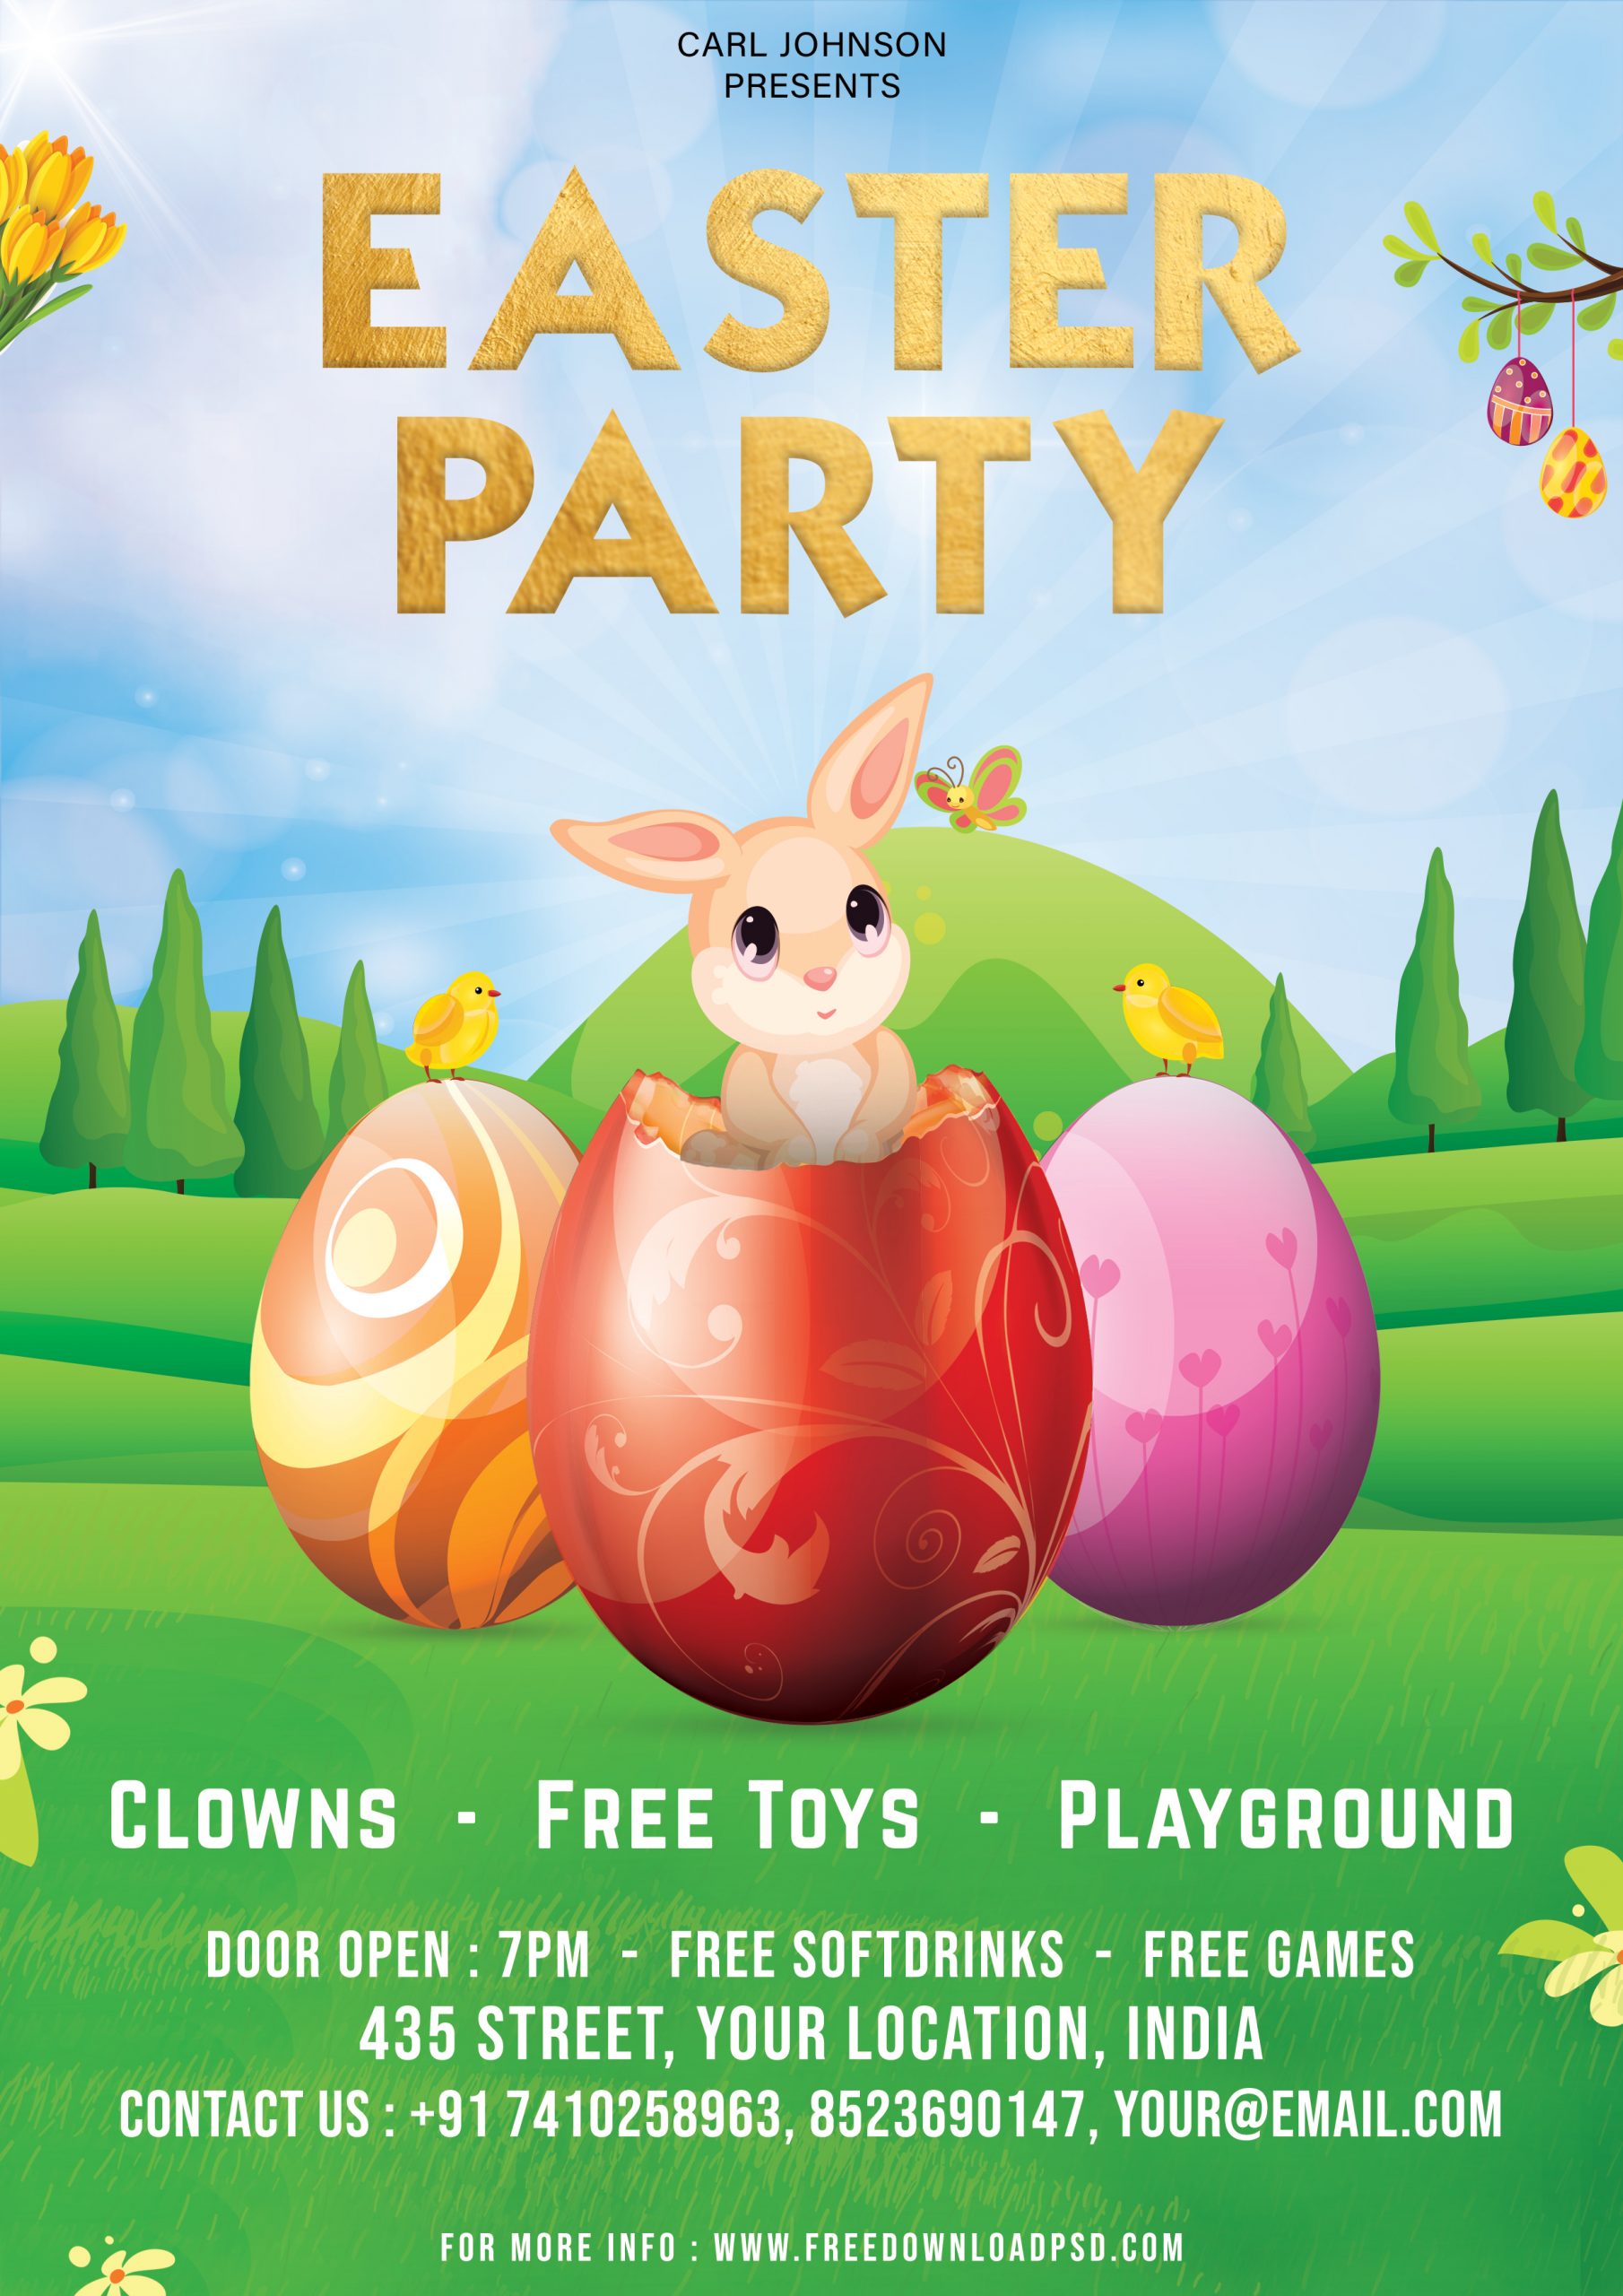 Easter Party Flyer Free PSD